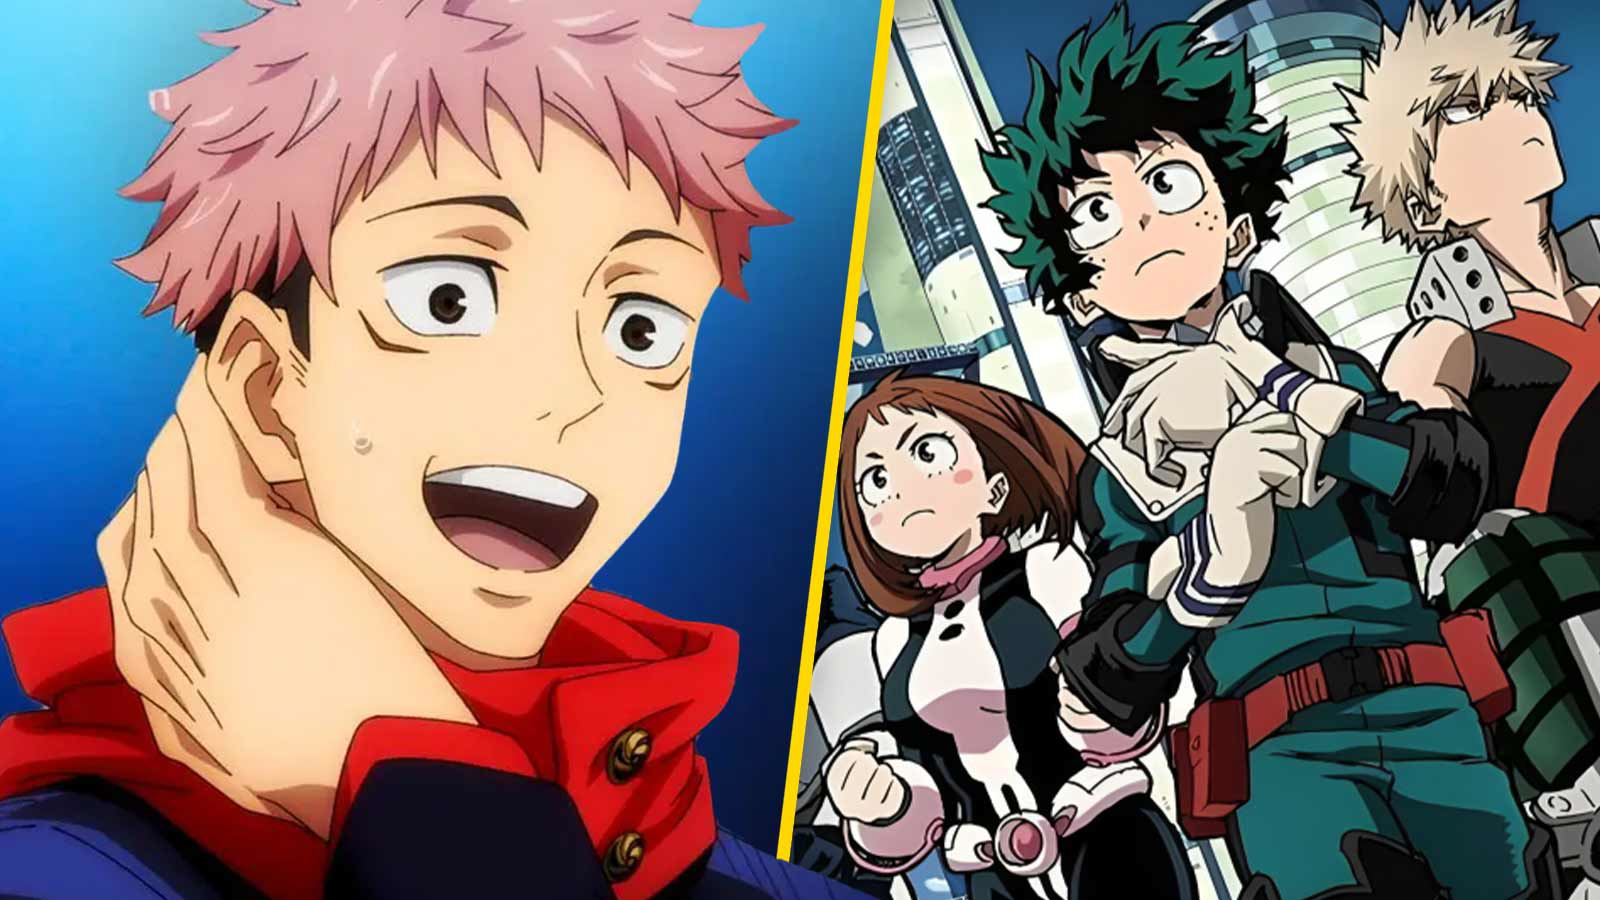 Jujutsu Kaisen: Gege Akutami Found Solace in the Same Soccer Player that Helped Kohei Horikoshi Create One of the Strongest My Hero Academia Characters